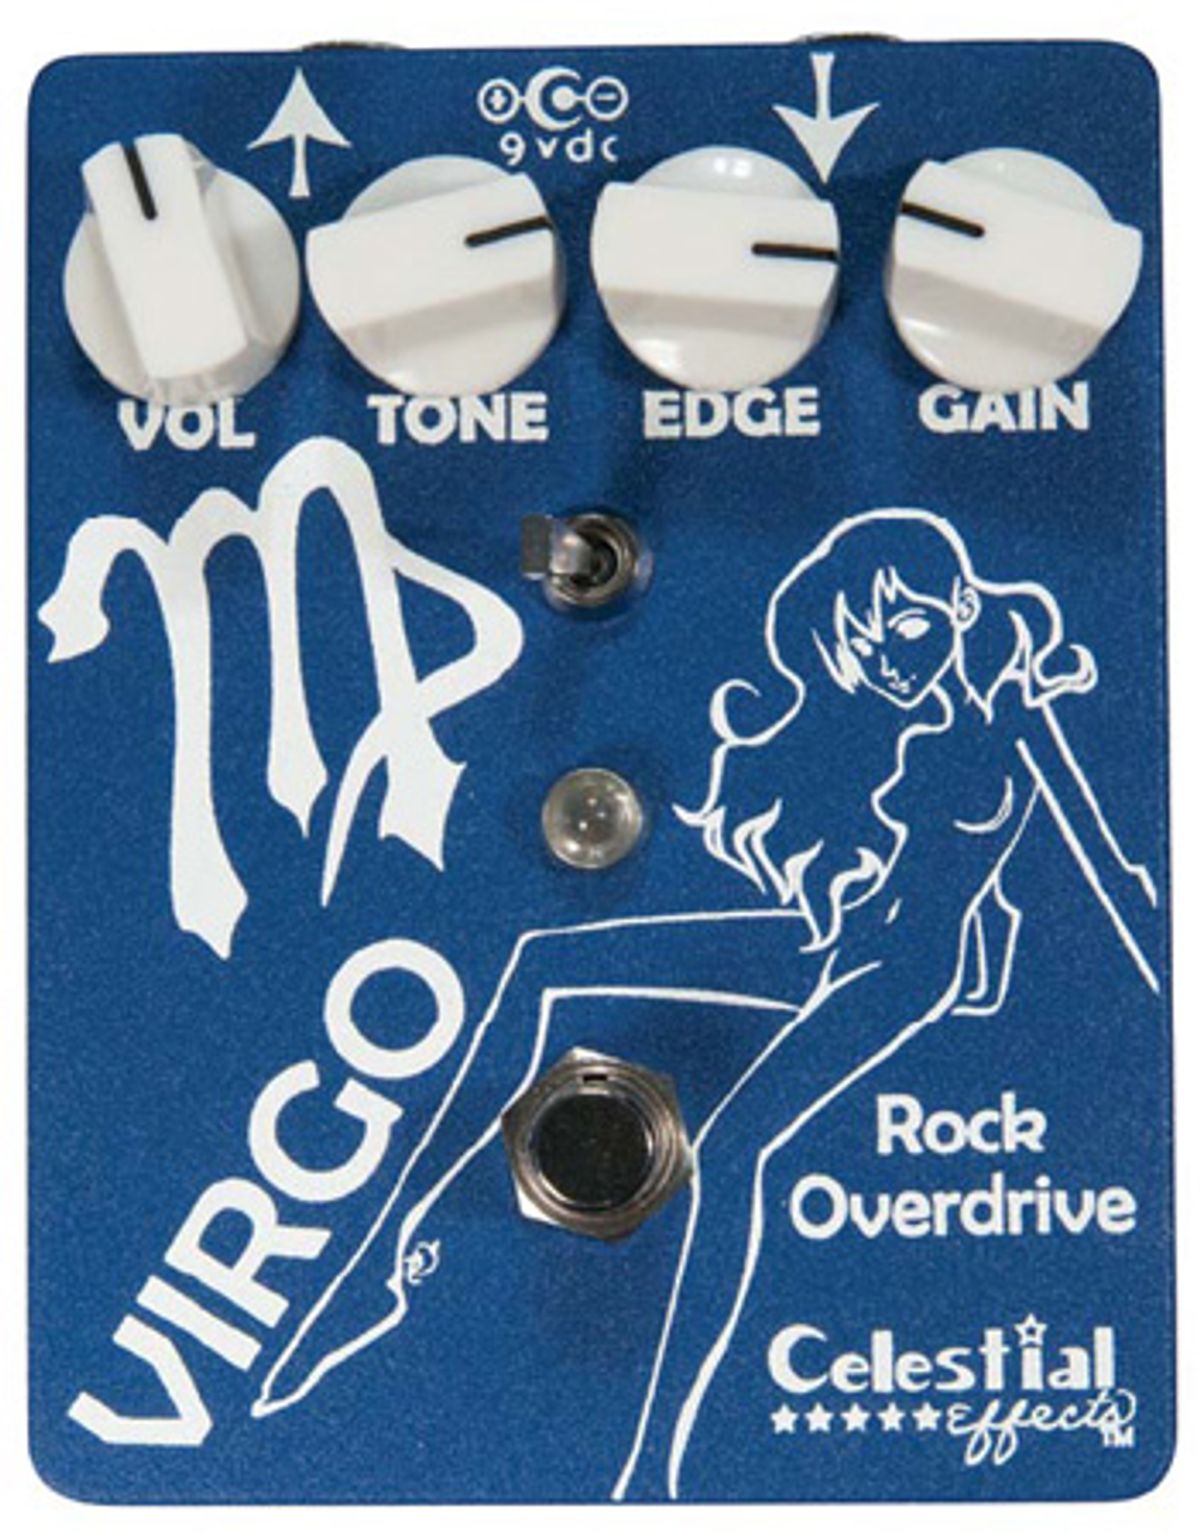 Celestial Effects Virgo Overdrive Pedal Review